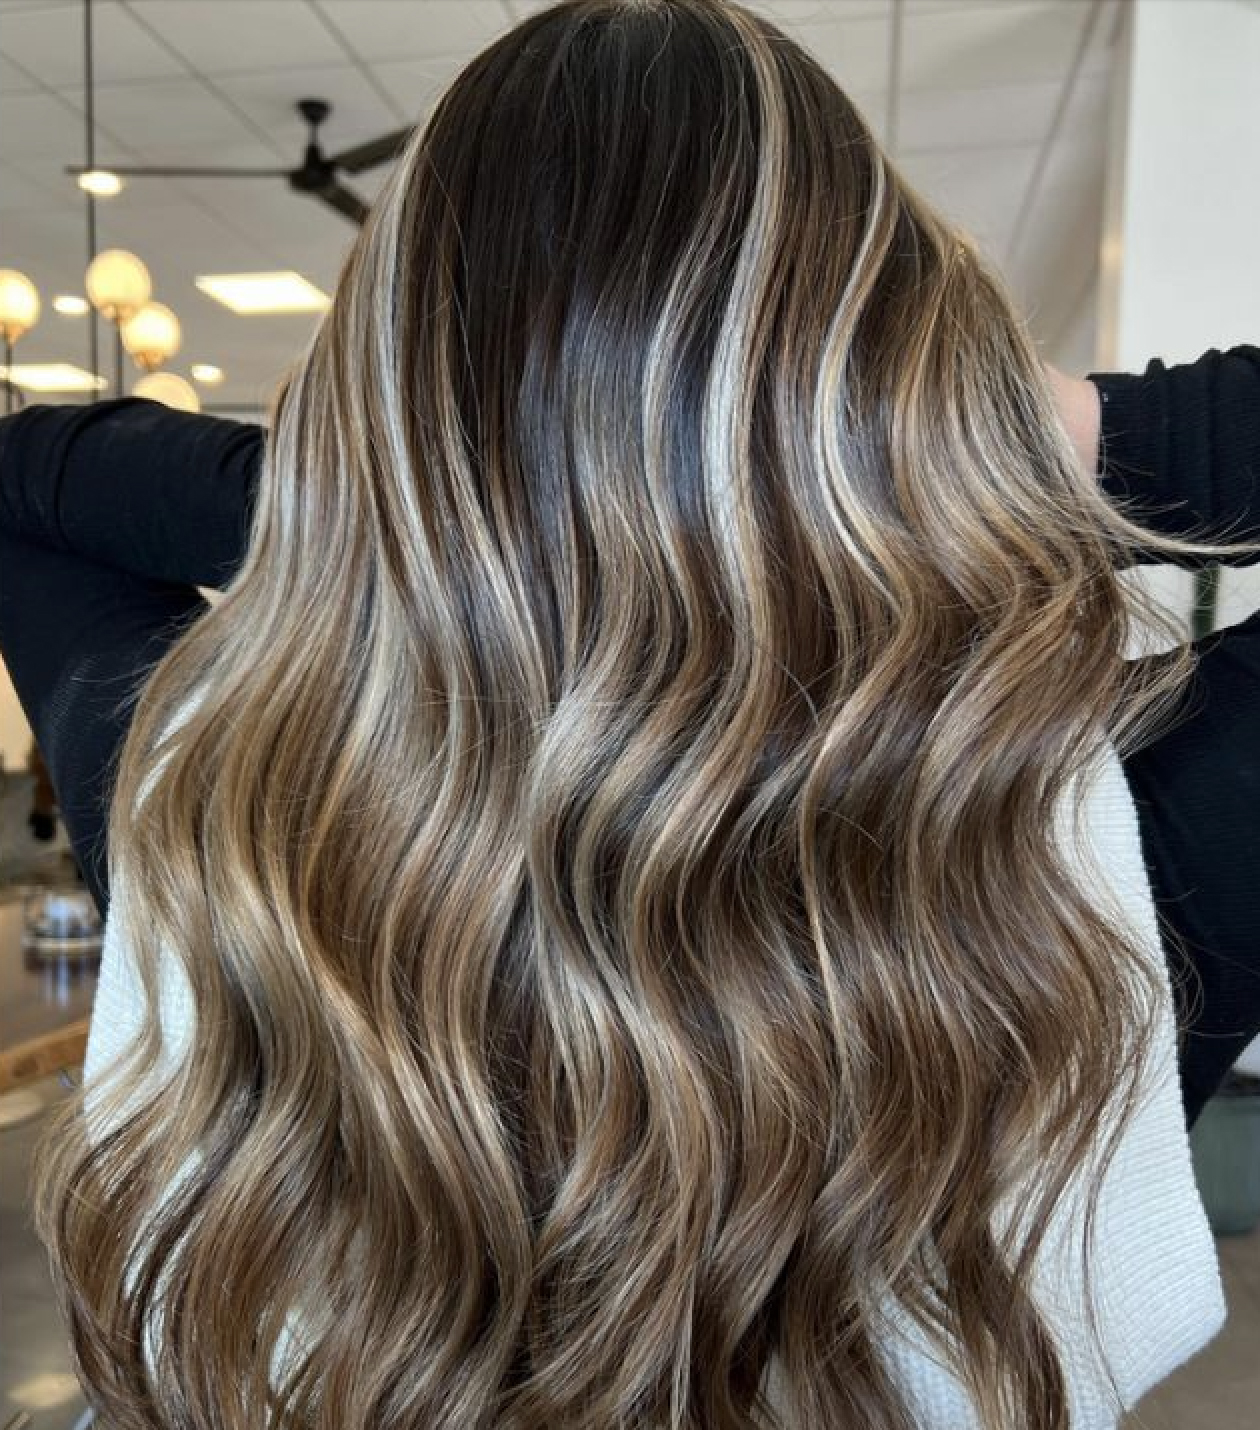 20 Ideas of Highlights and Lowlights for Your New Hair Color